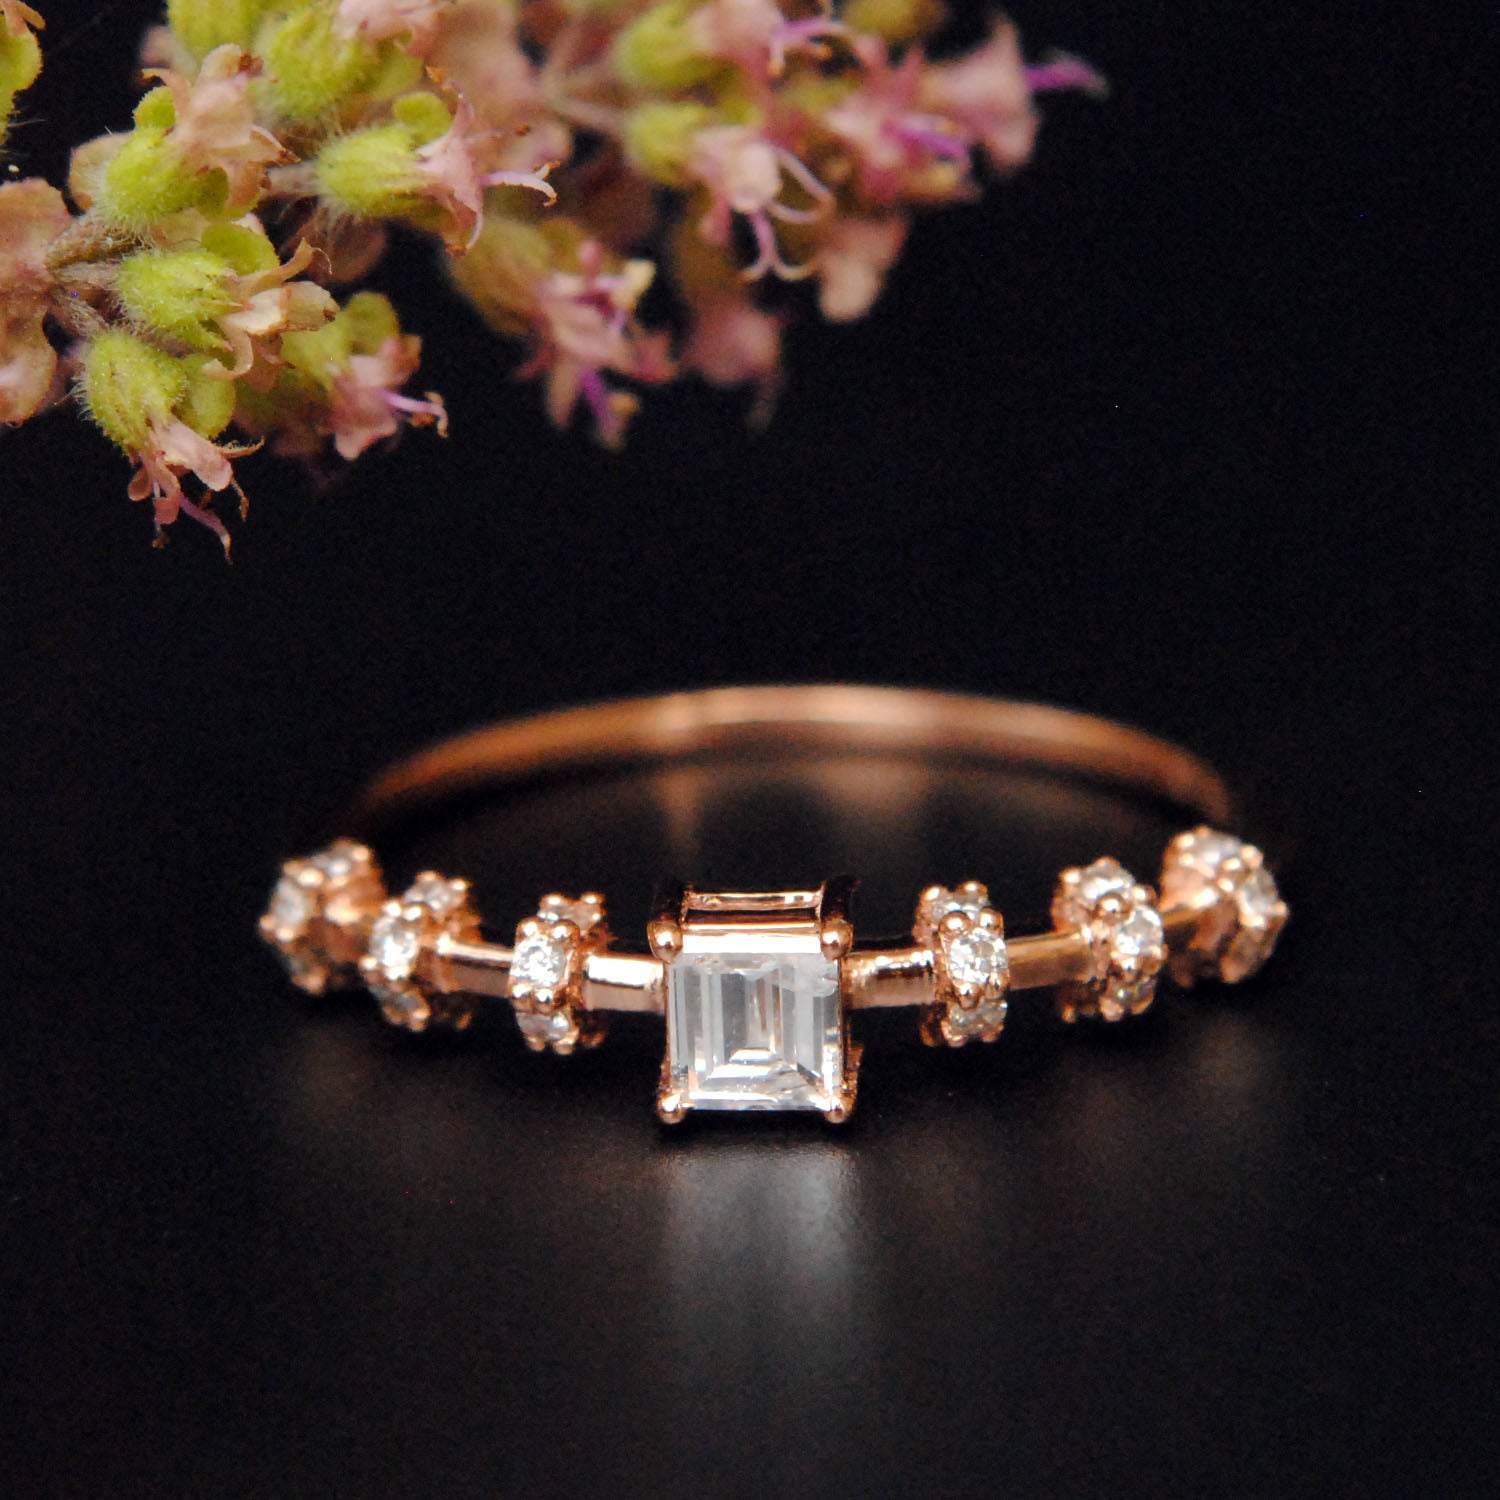 Square Baguette Diamond Engagement Ring with Studded Shank